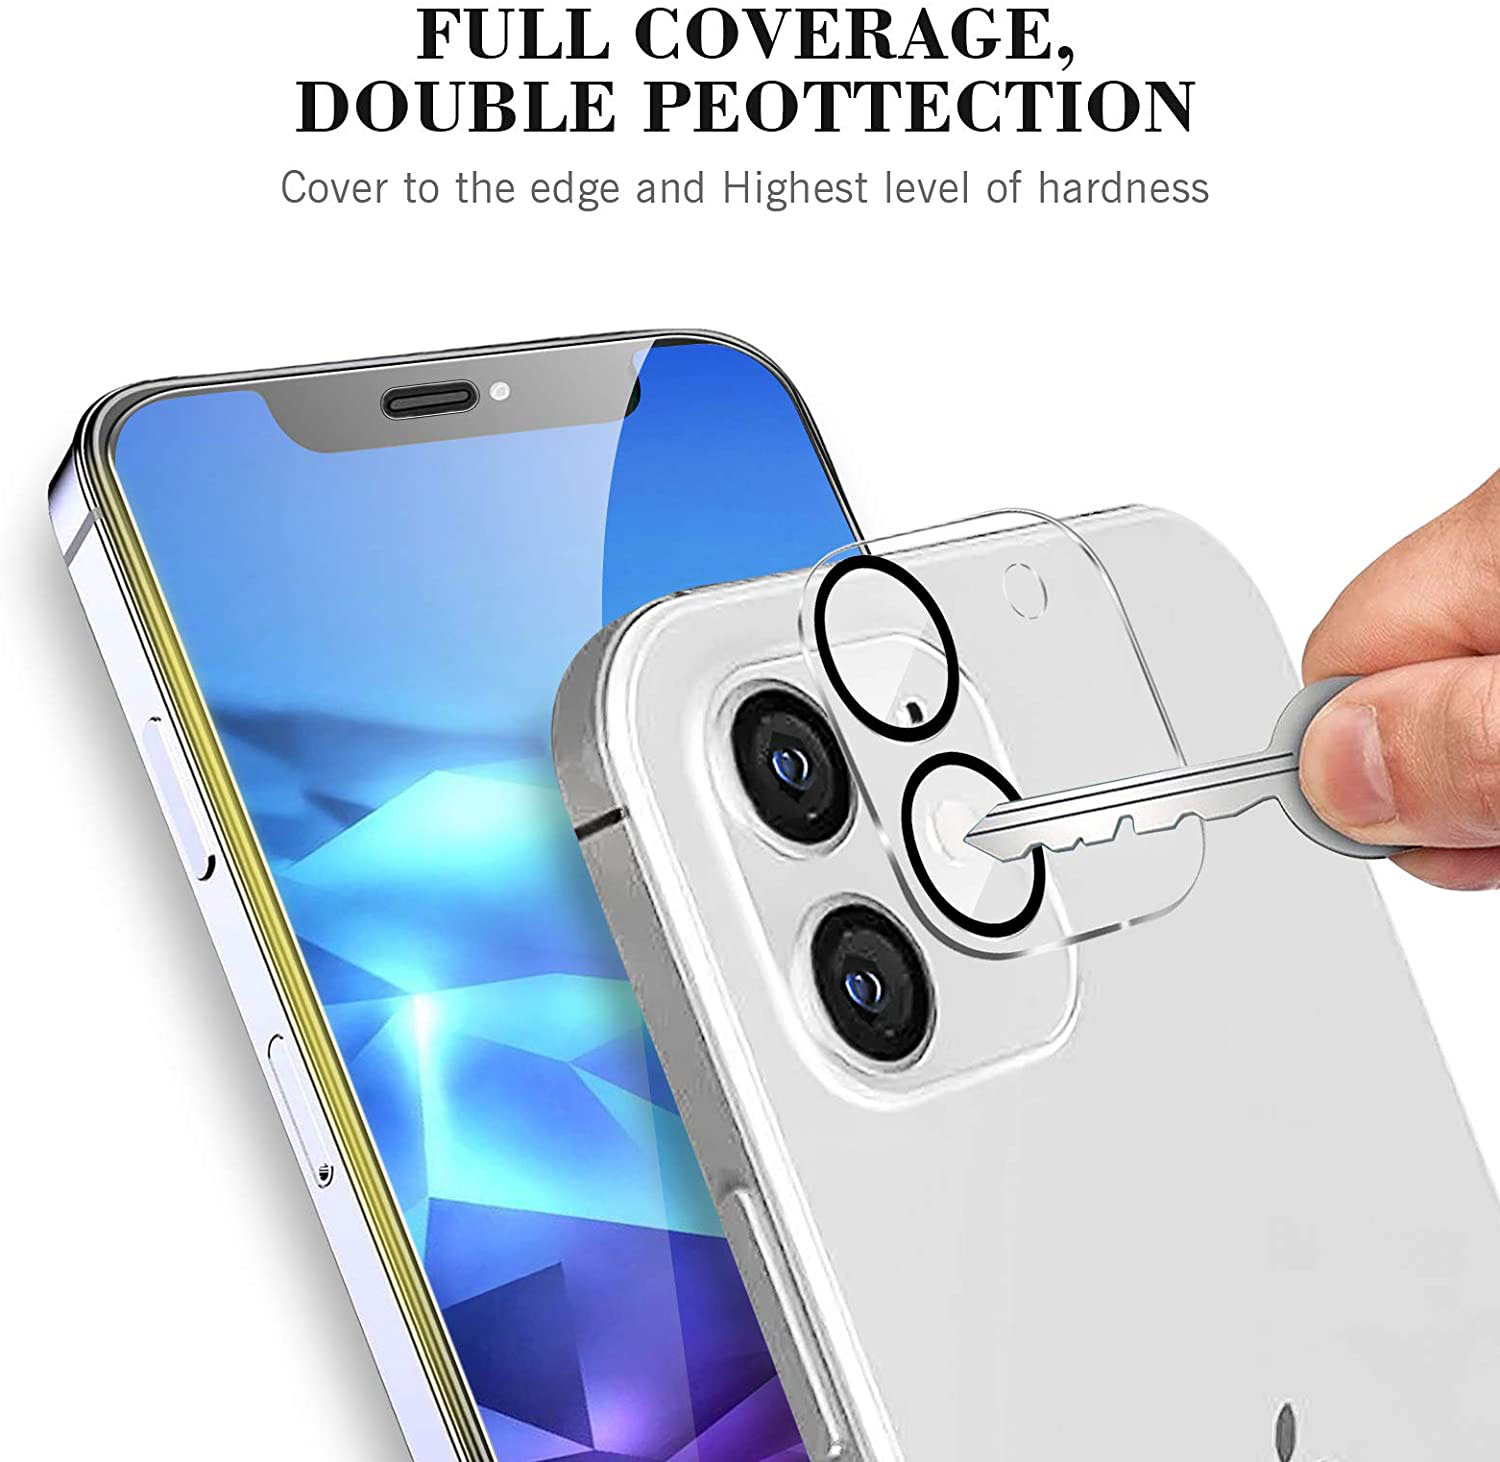 Camera Lens HD Tempered Glass Protector for iPHONE 12 [6.1] Only (Transparent Clear)